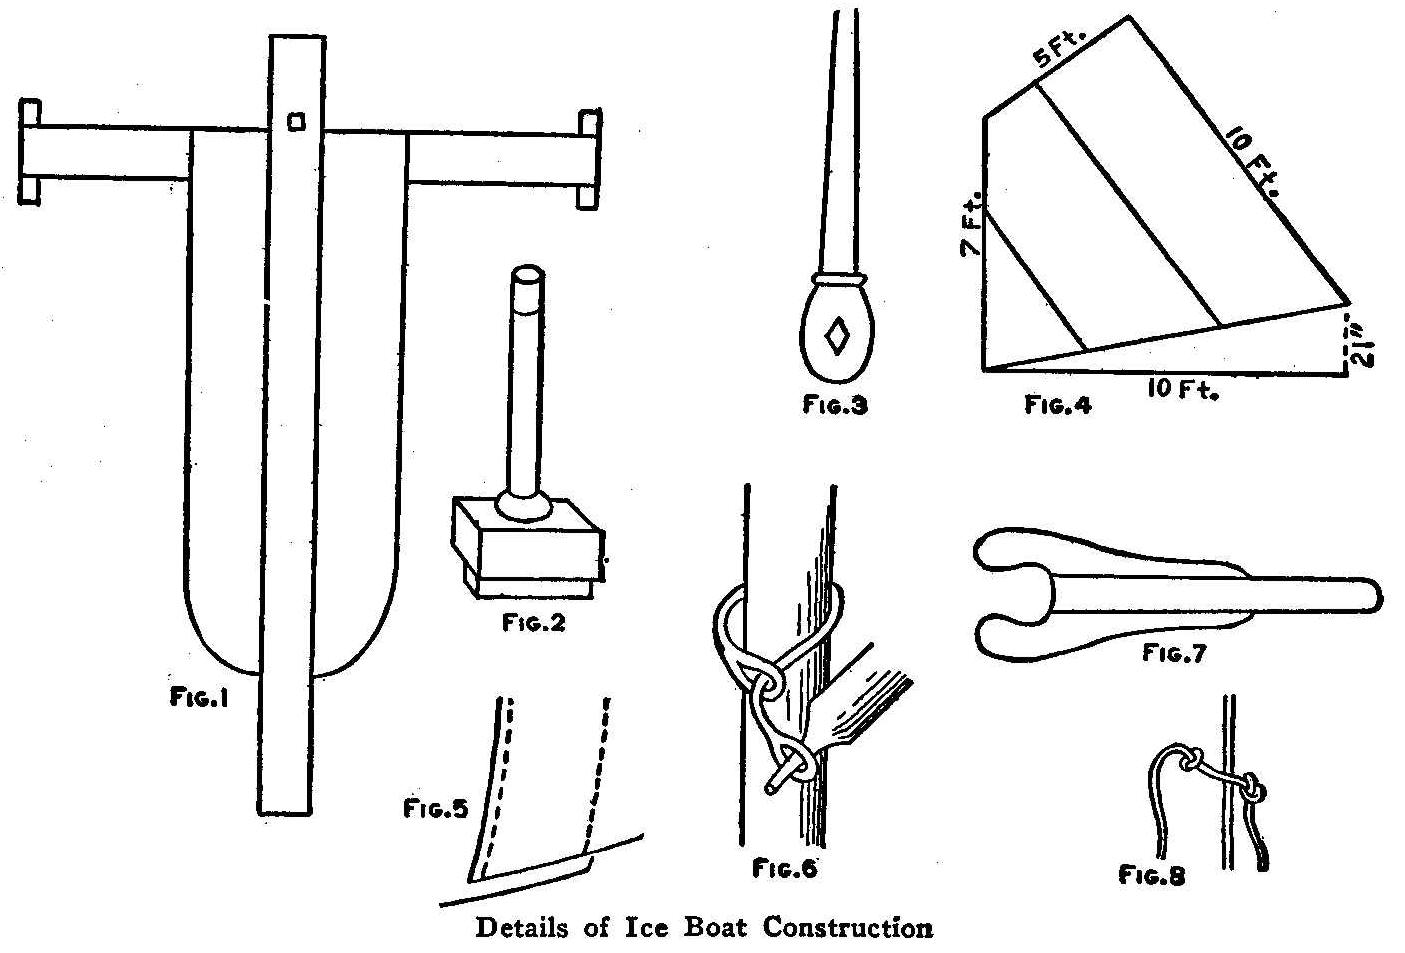 Details of Ice Boat Construction 